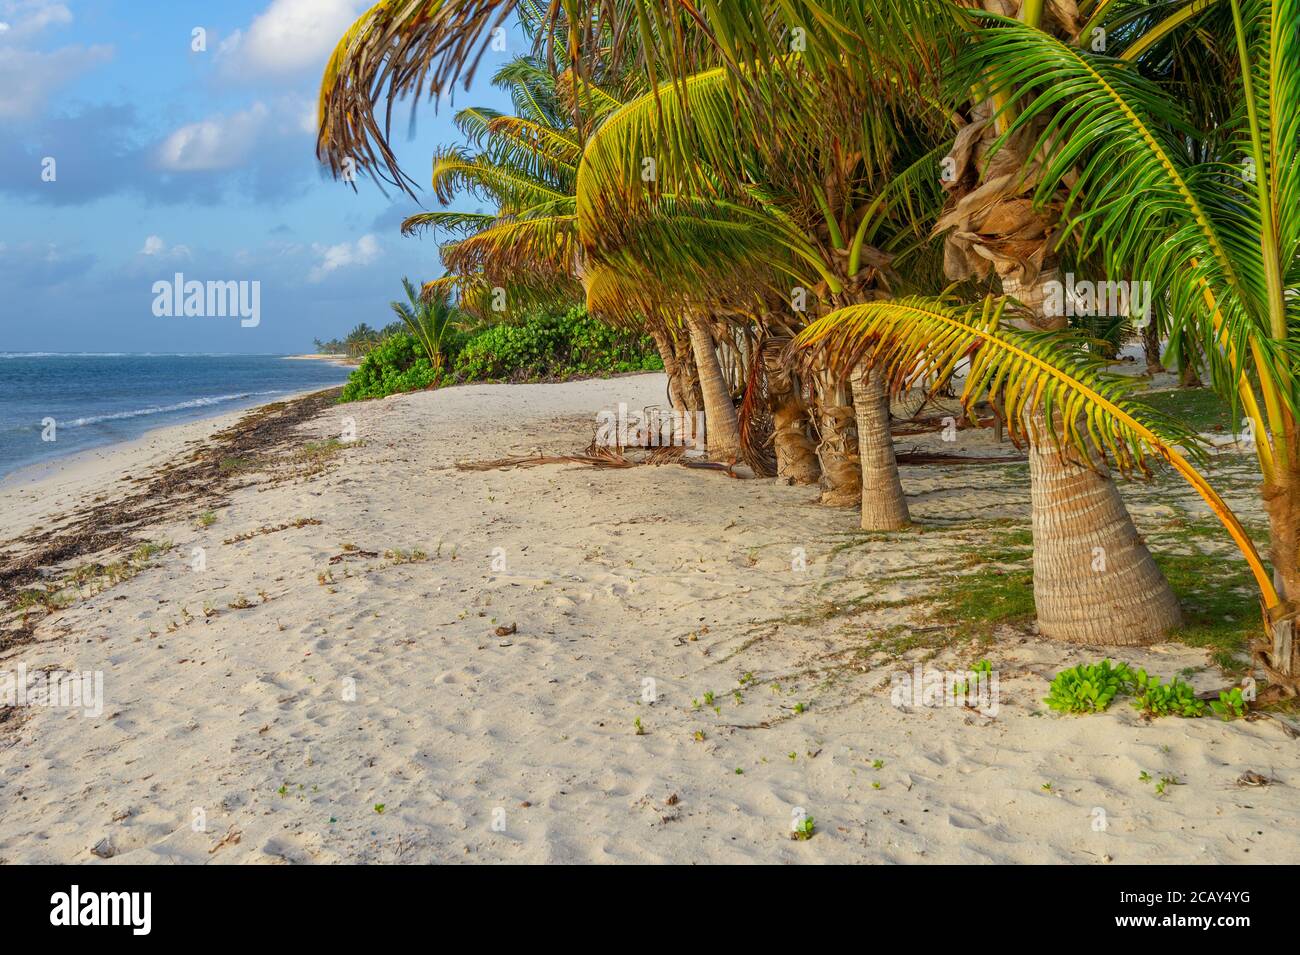 Wild unspoiled beach with palm trees, Grand Cayman Island Stock Photo